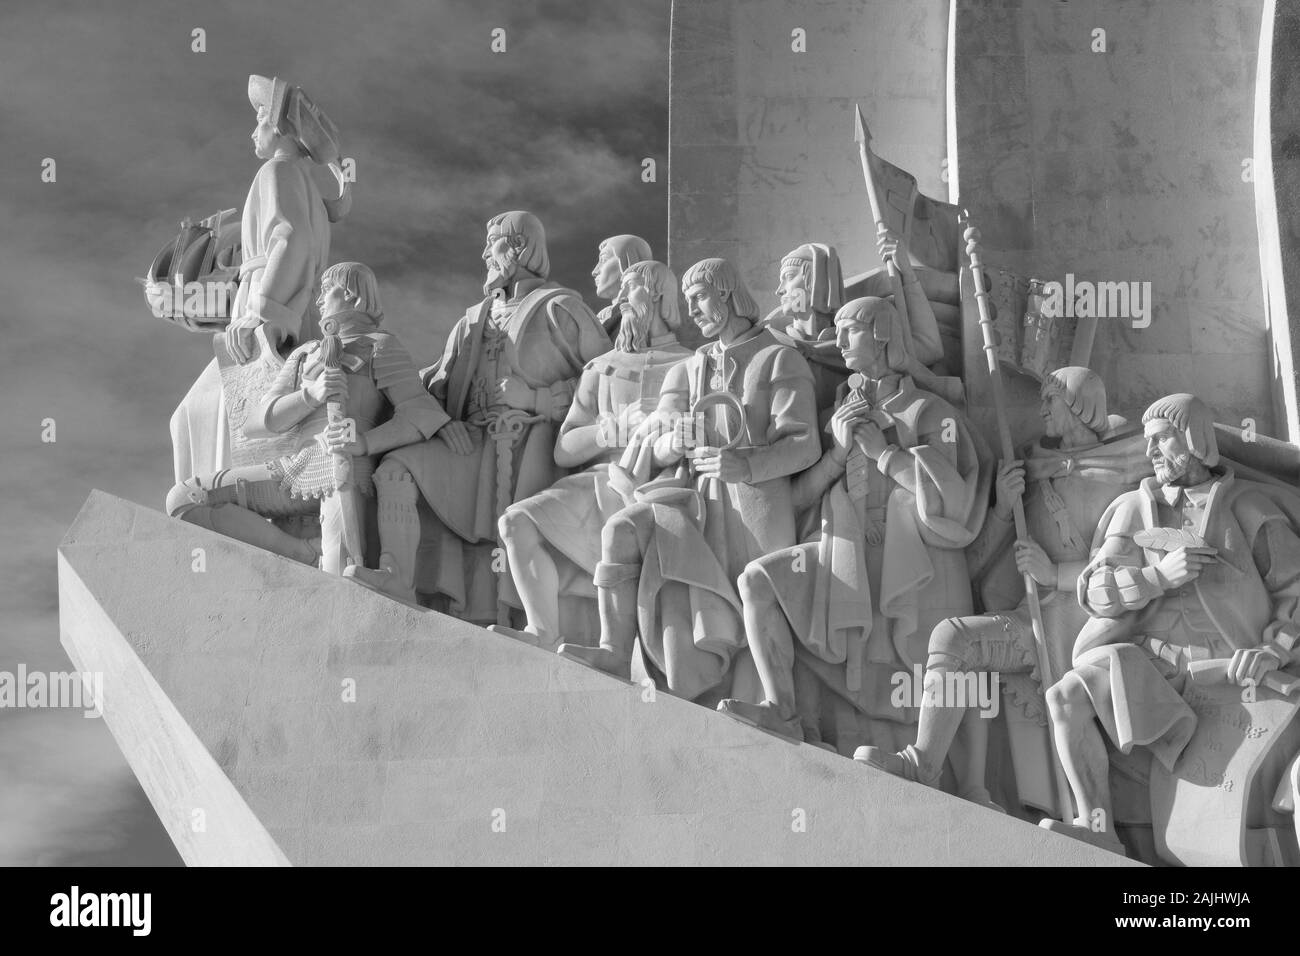 Monument to the Discoveries of the New World, Henry the Navigator, Discovery, History, Exploring, Stone Sculpture, Figures, Stone, Belem, Portugal. Stock Photo